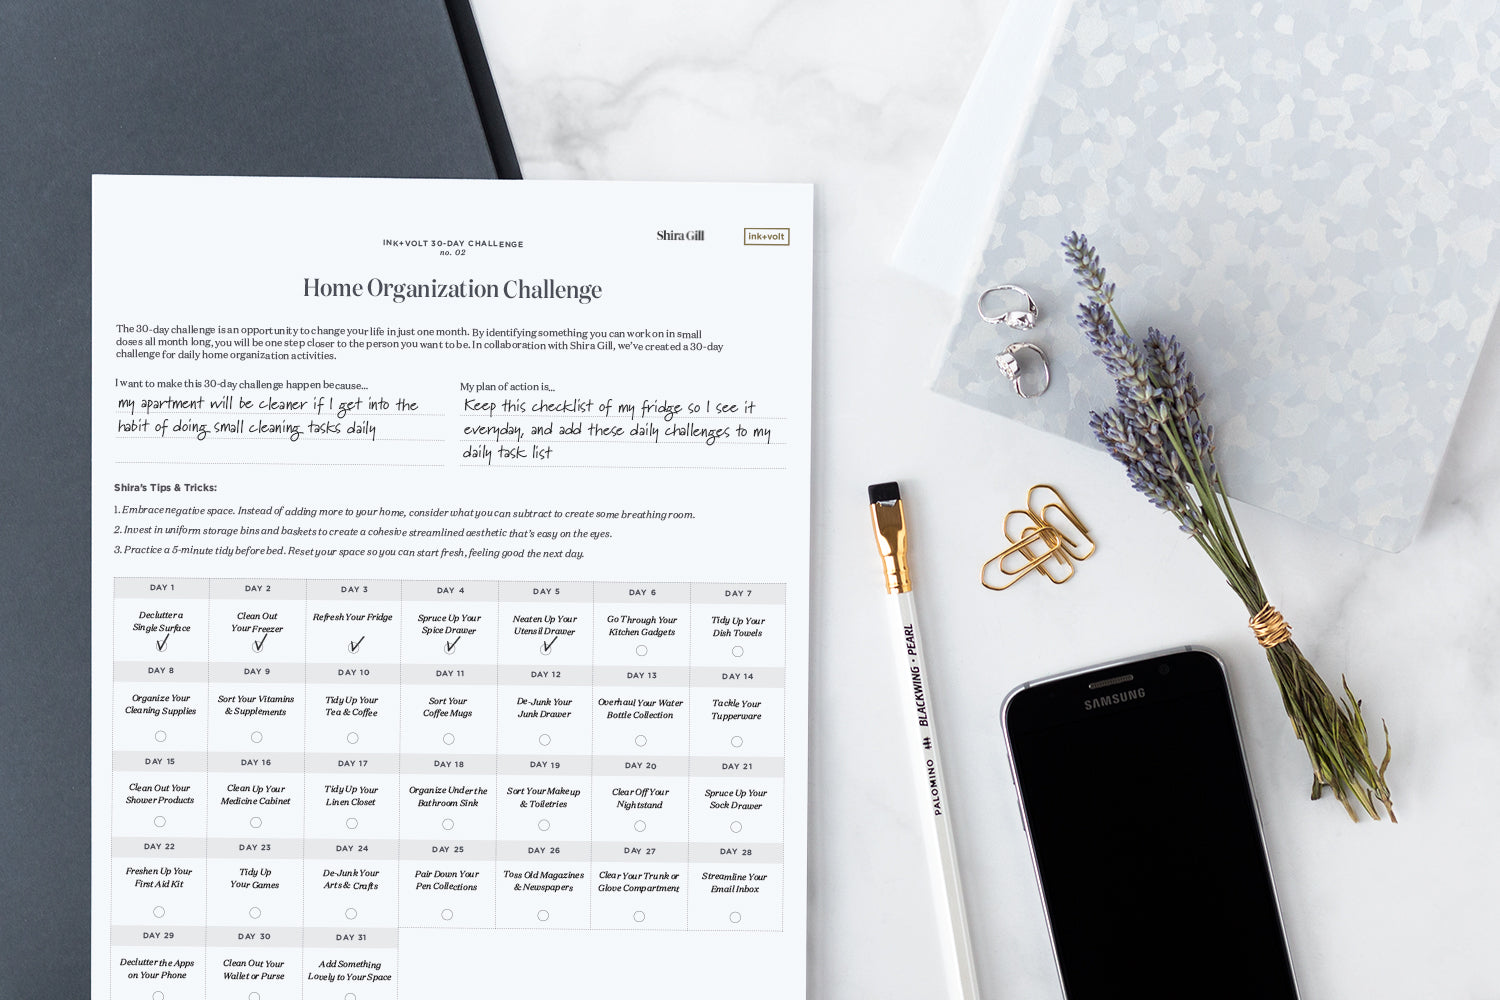 Shira Gill's 30 day challenge worksheet sits on a beautiful organized desk.